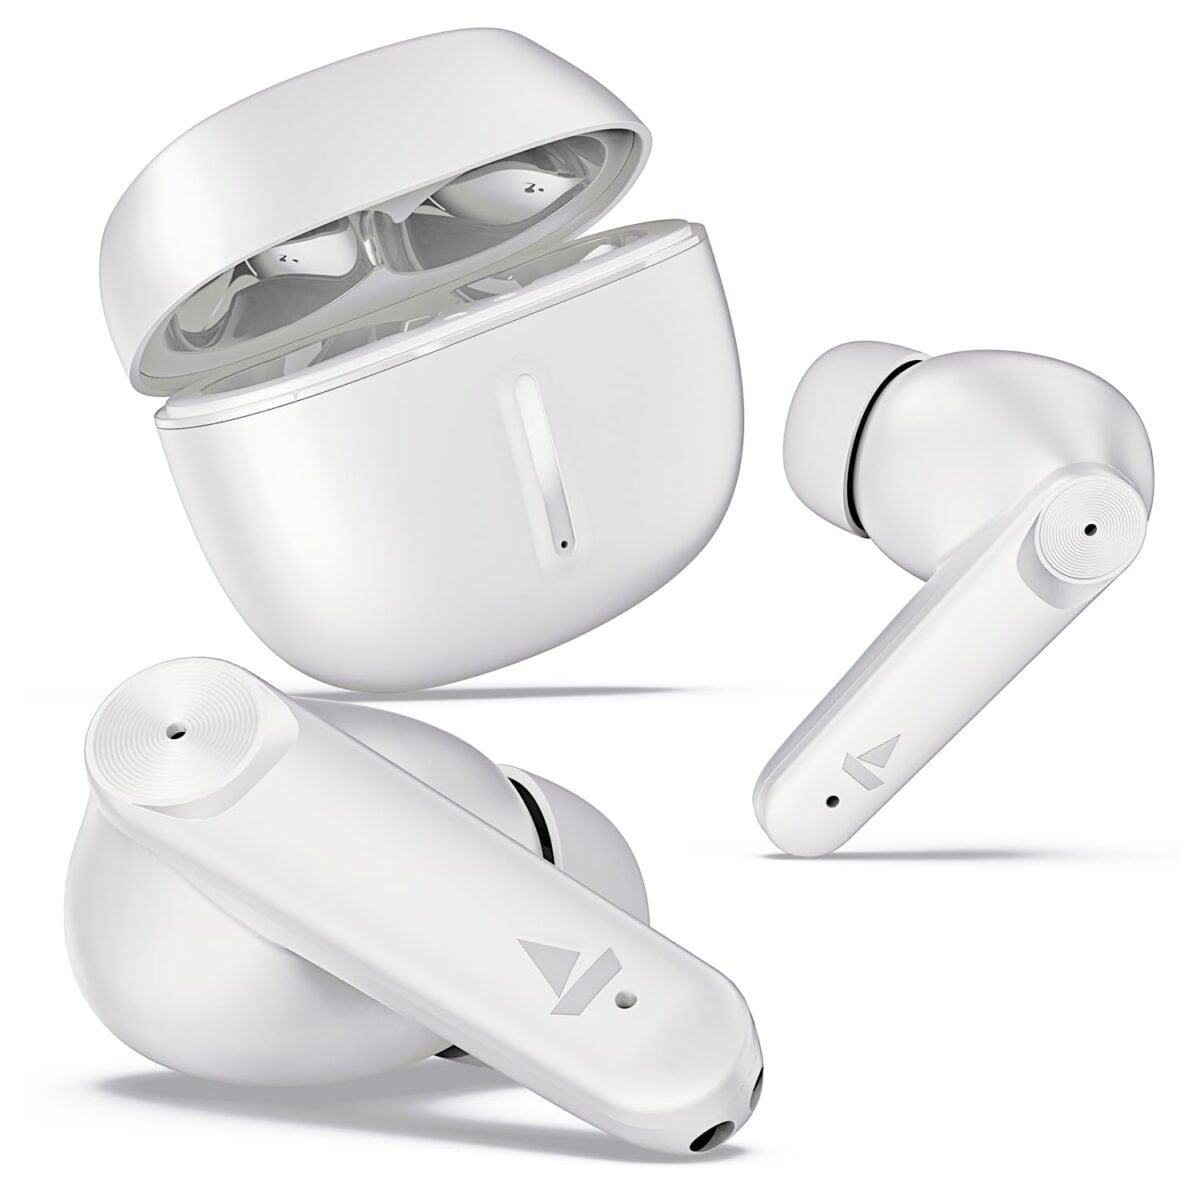 Boat airdopes max tws earbuds with 100 hrs playtime white 1 boat airdopes max tws earbuds